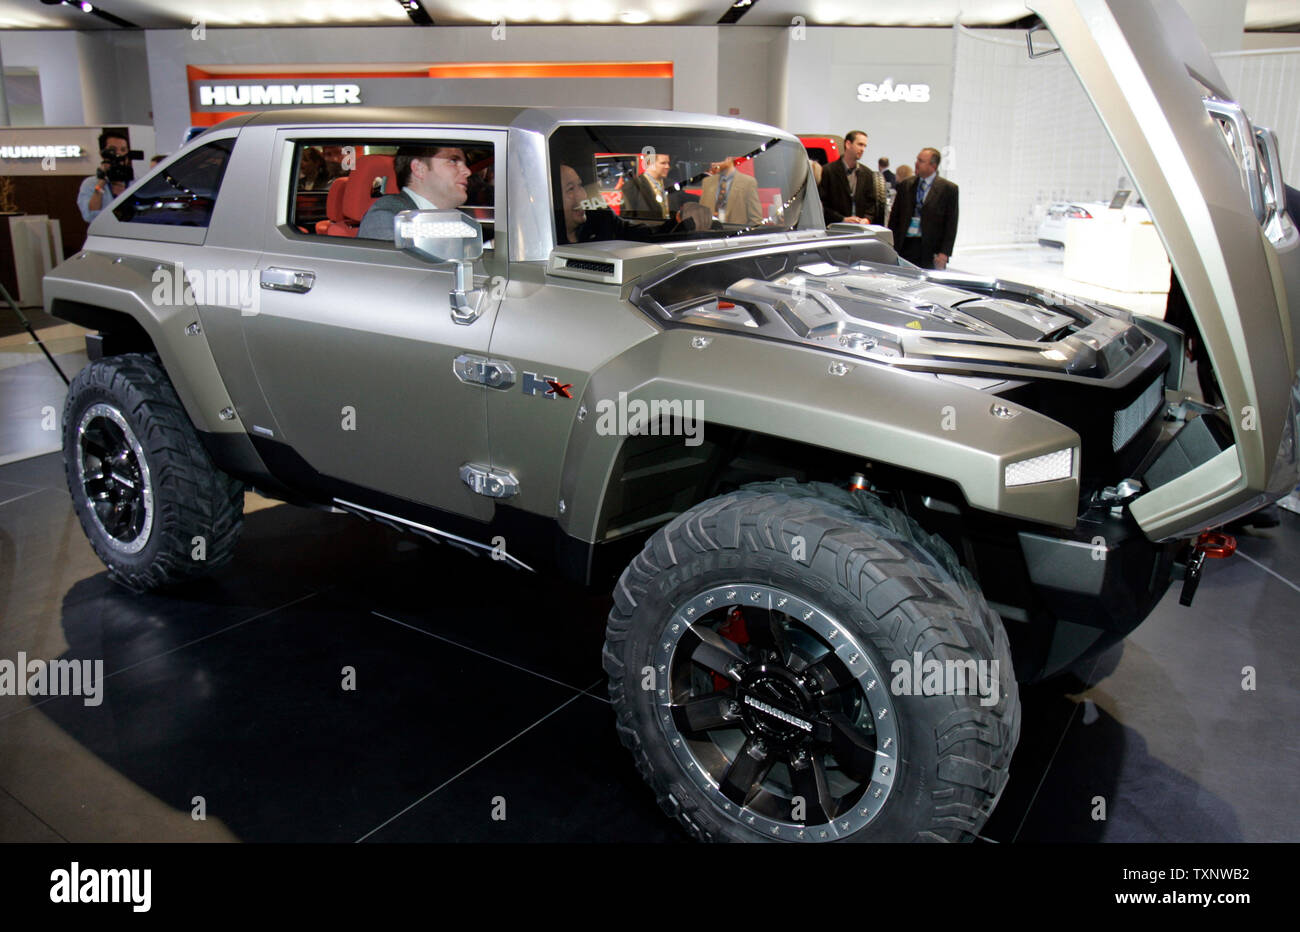 General Motors Hummer division unveiled it's concept car the HX, which is E-85 compatible, during the 2008 North American International Auto Show at the Cobo Center in Detroit January 14, 2008. (UPI Photo/Mark Cowan) Stock Photo